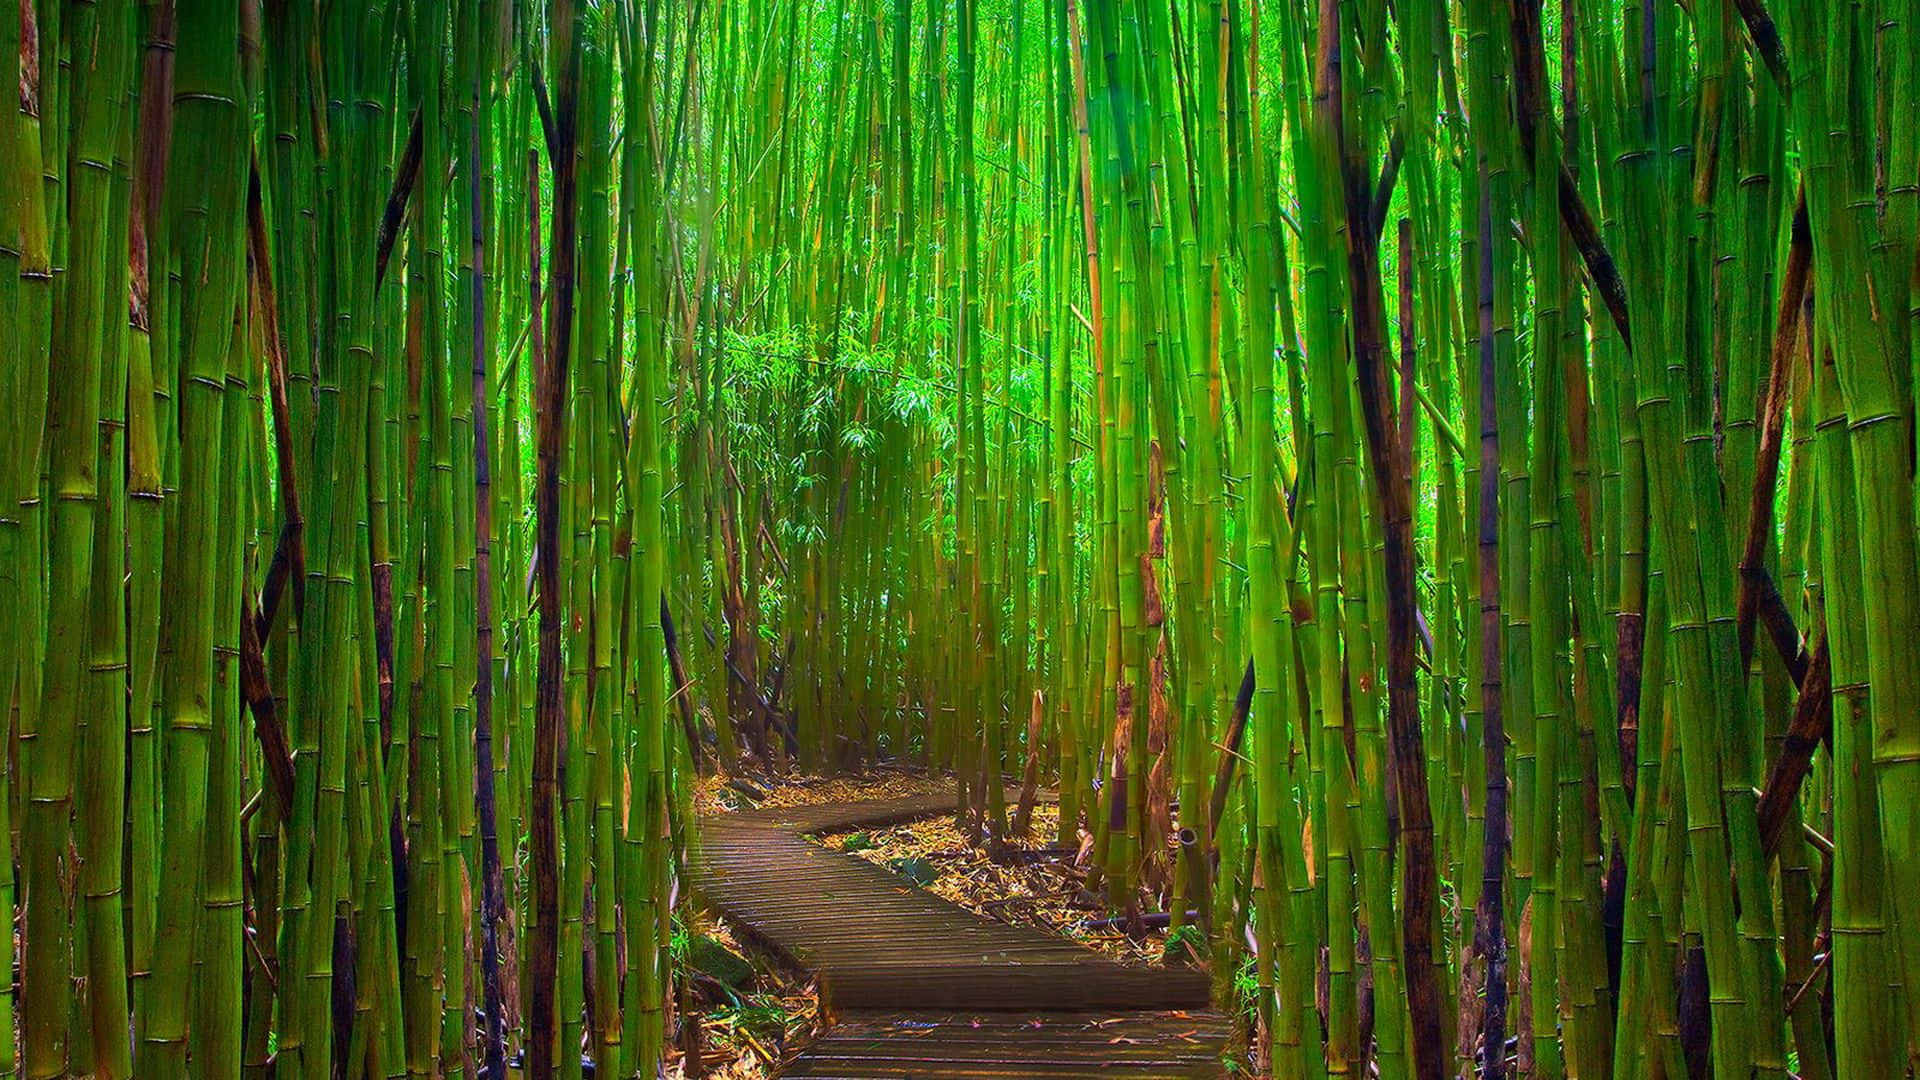 "A lush bamboo forest, perfect for relaxation"